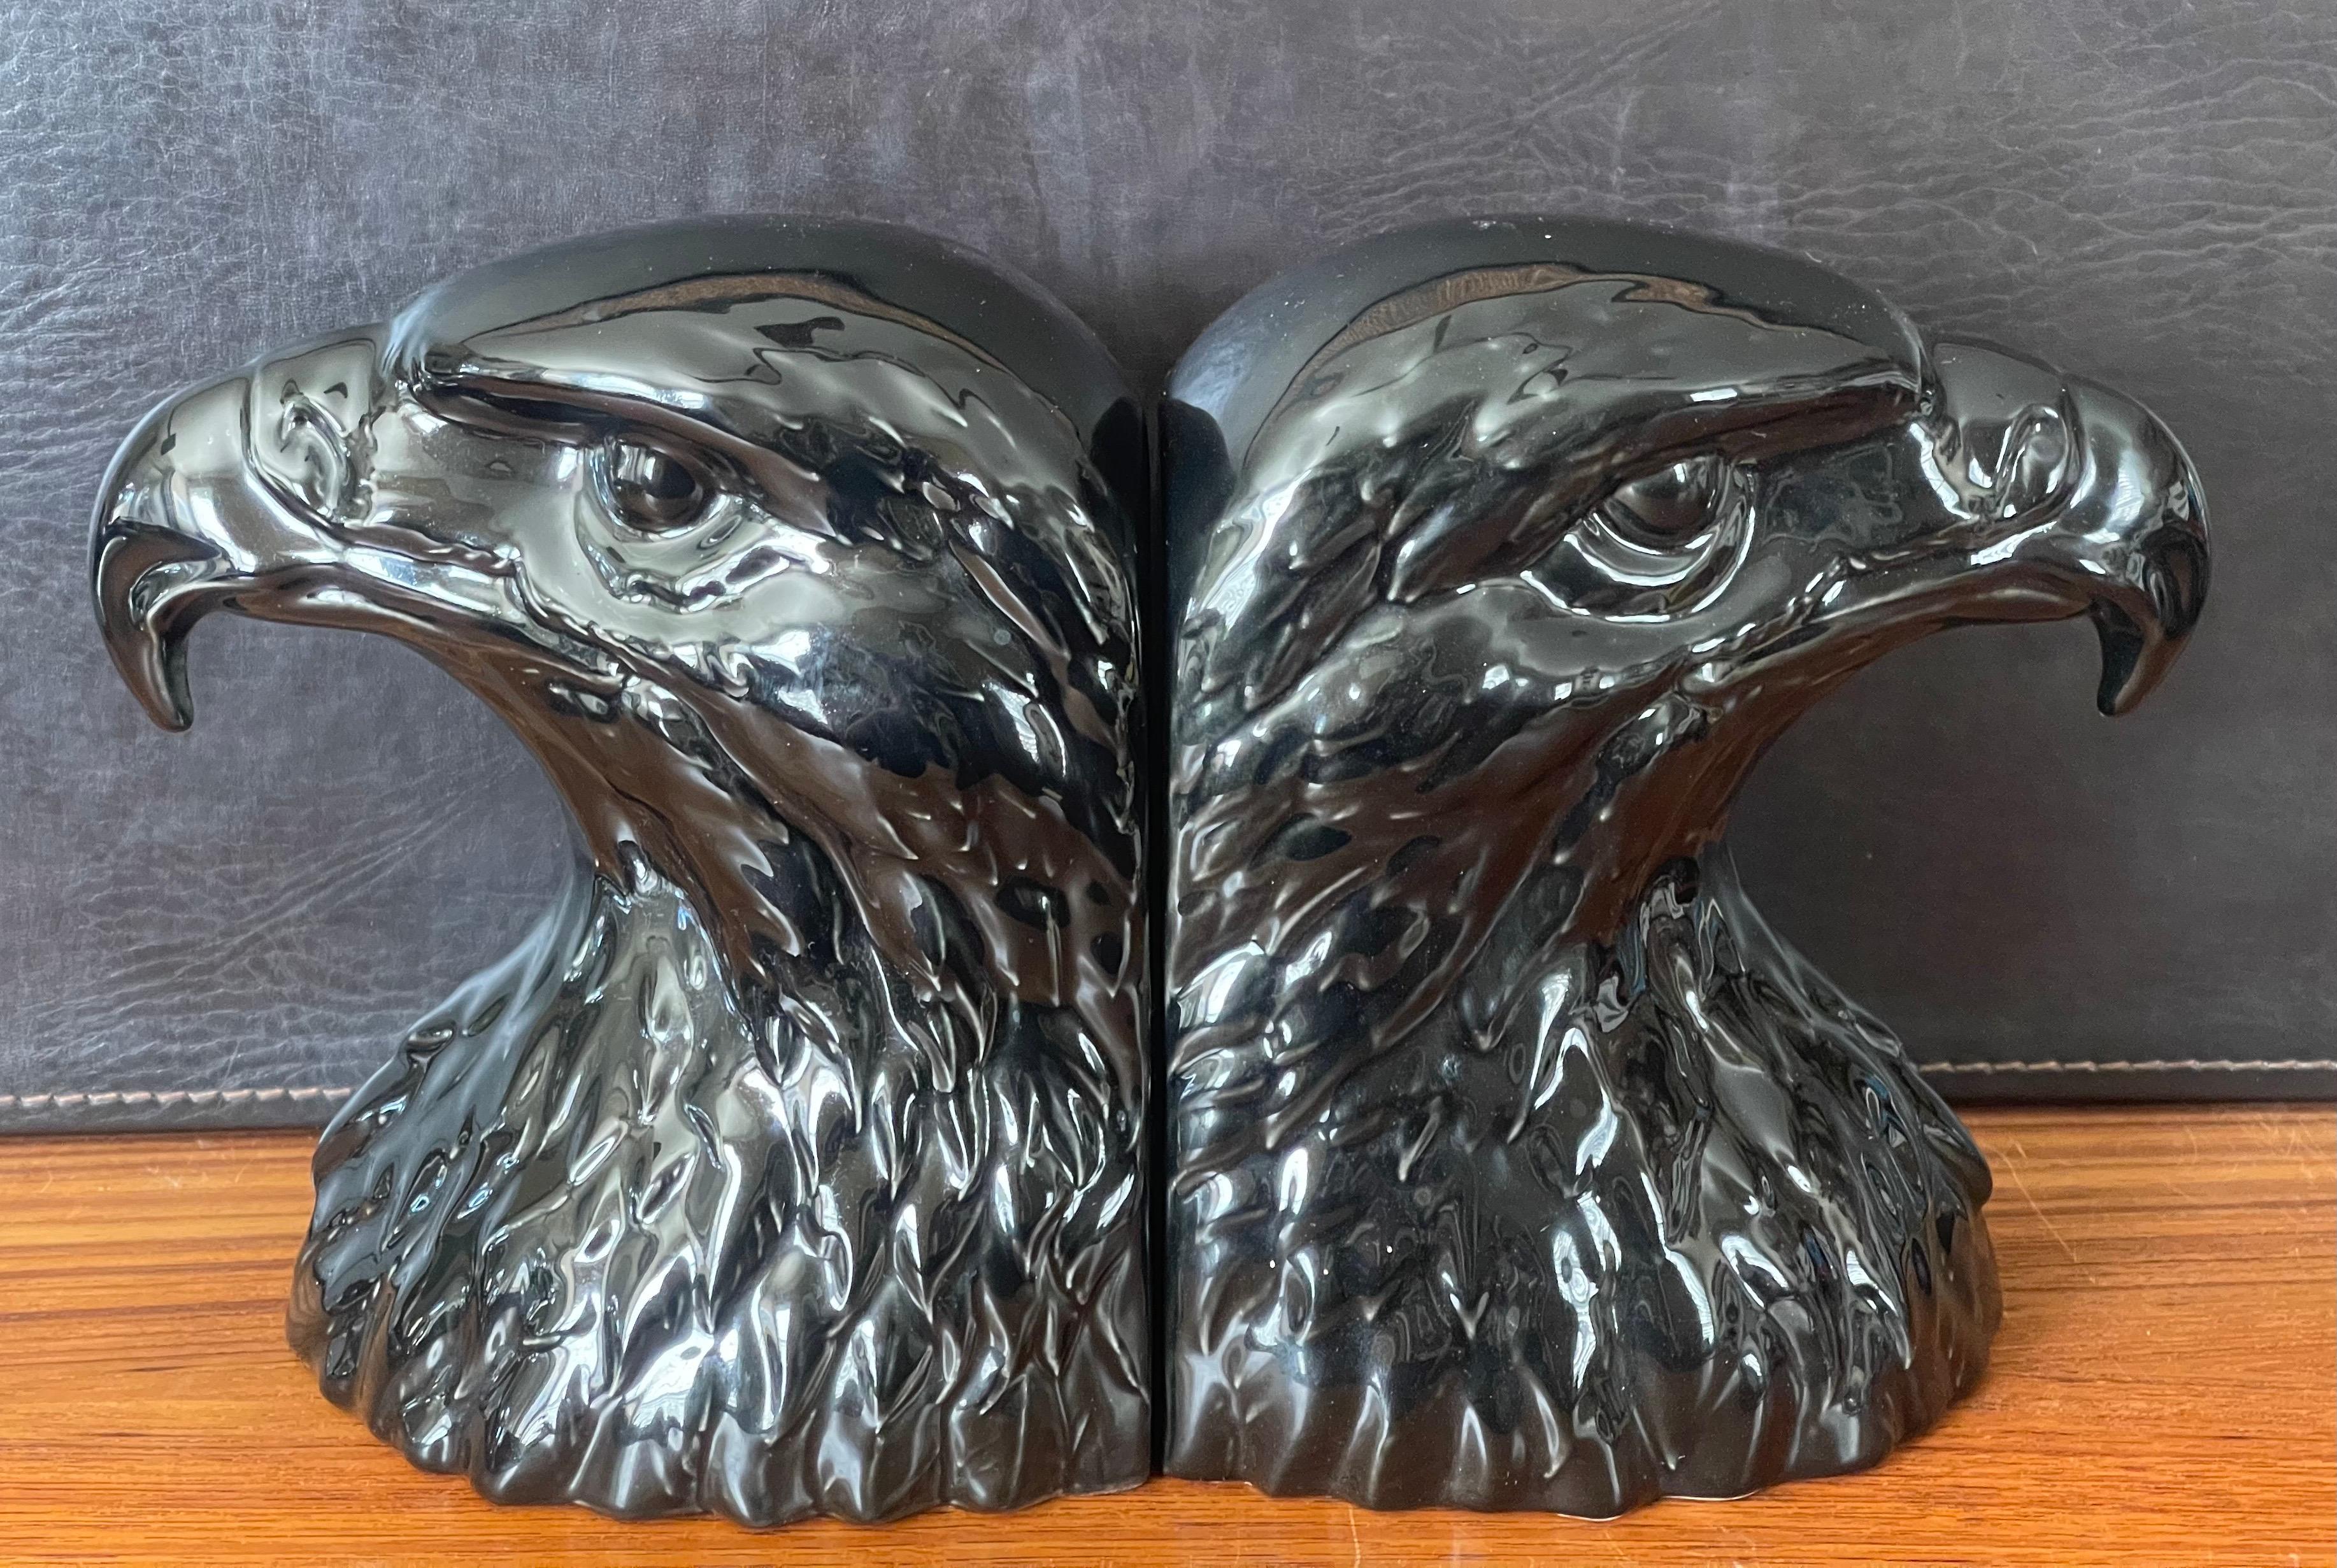 Mid-Century Modern Pair of Glossy Black Porcelain Eagle Head Bookends by Hispania Daiso / LLadro